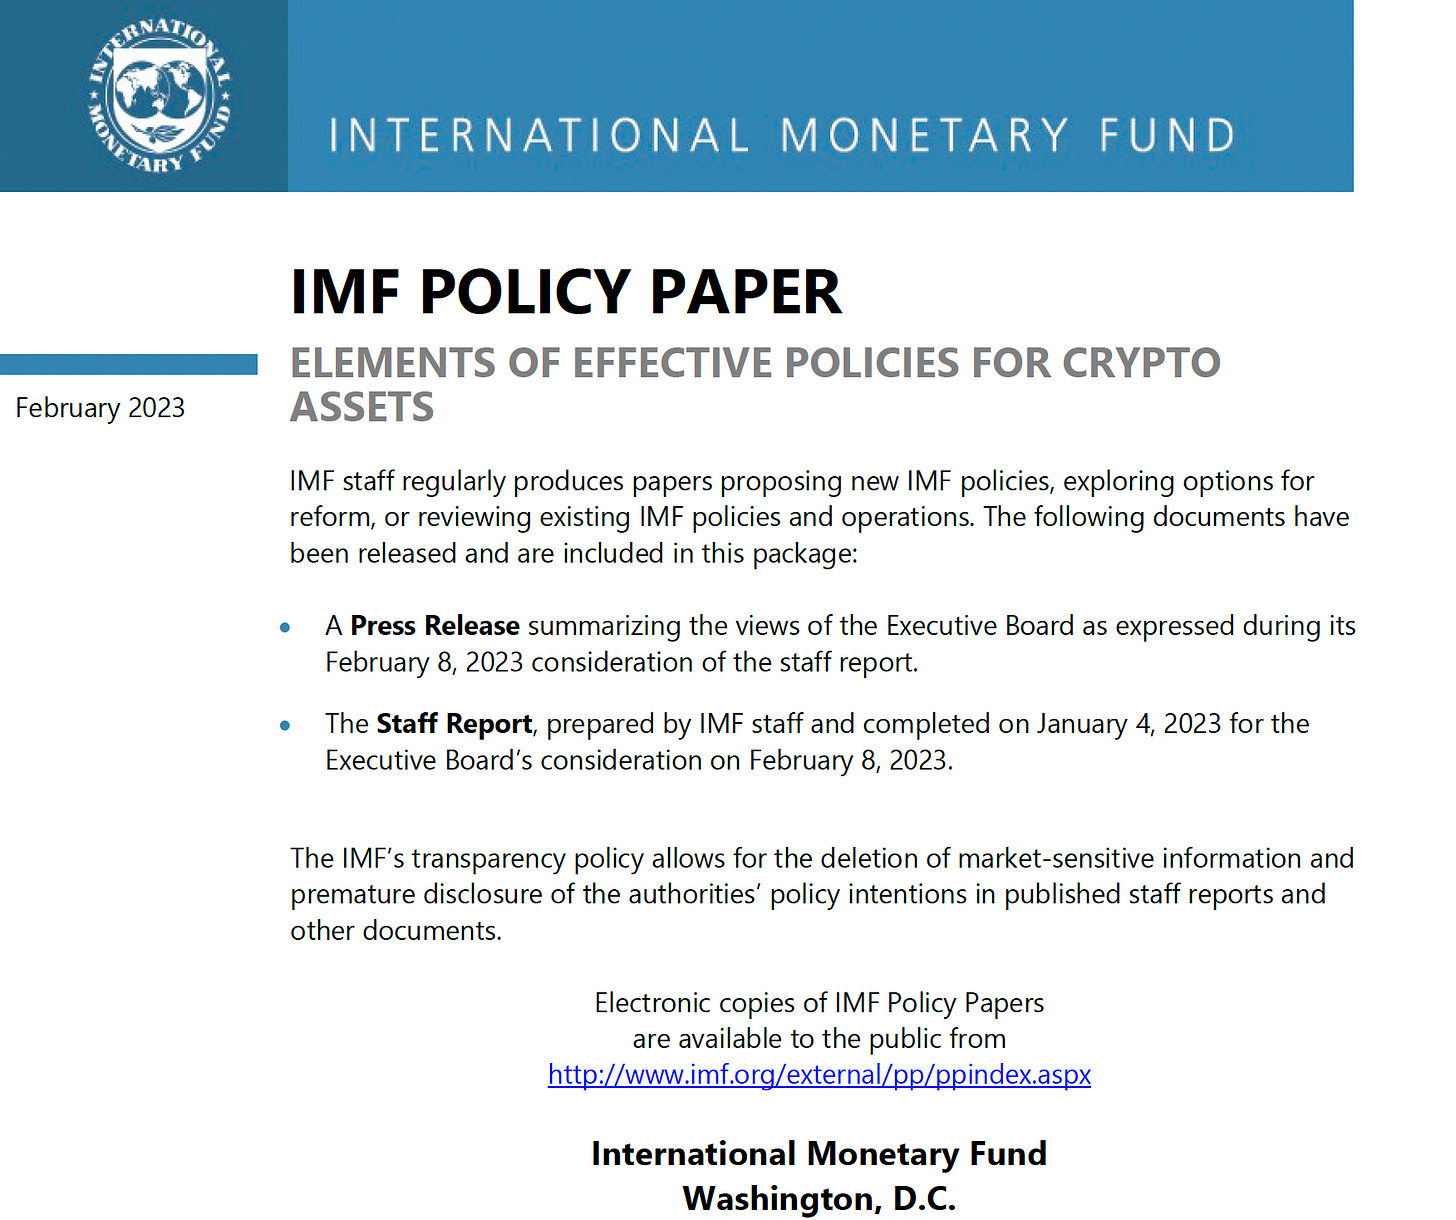 https://www.imf.org/en/Publications/Policy-Papers/Issues/2023/02/23/Elements-of-Effective-Policies-for-Crypto-Assets-530092?cid=pr-com-PPEA2023004